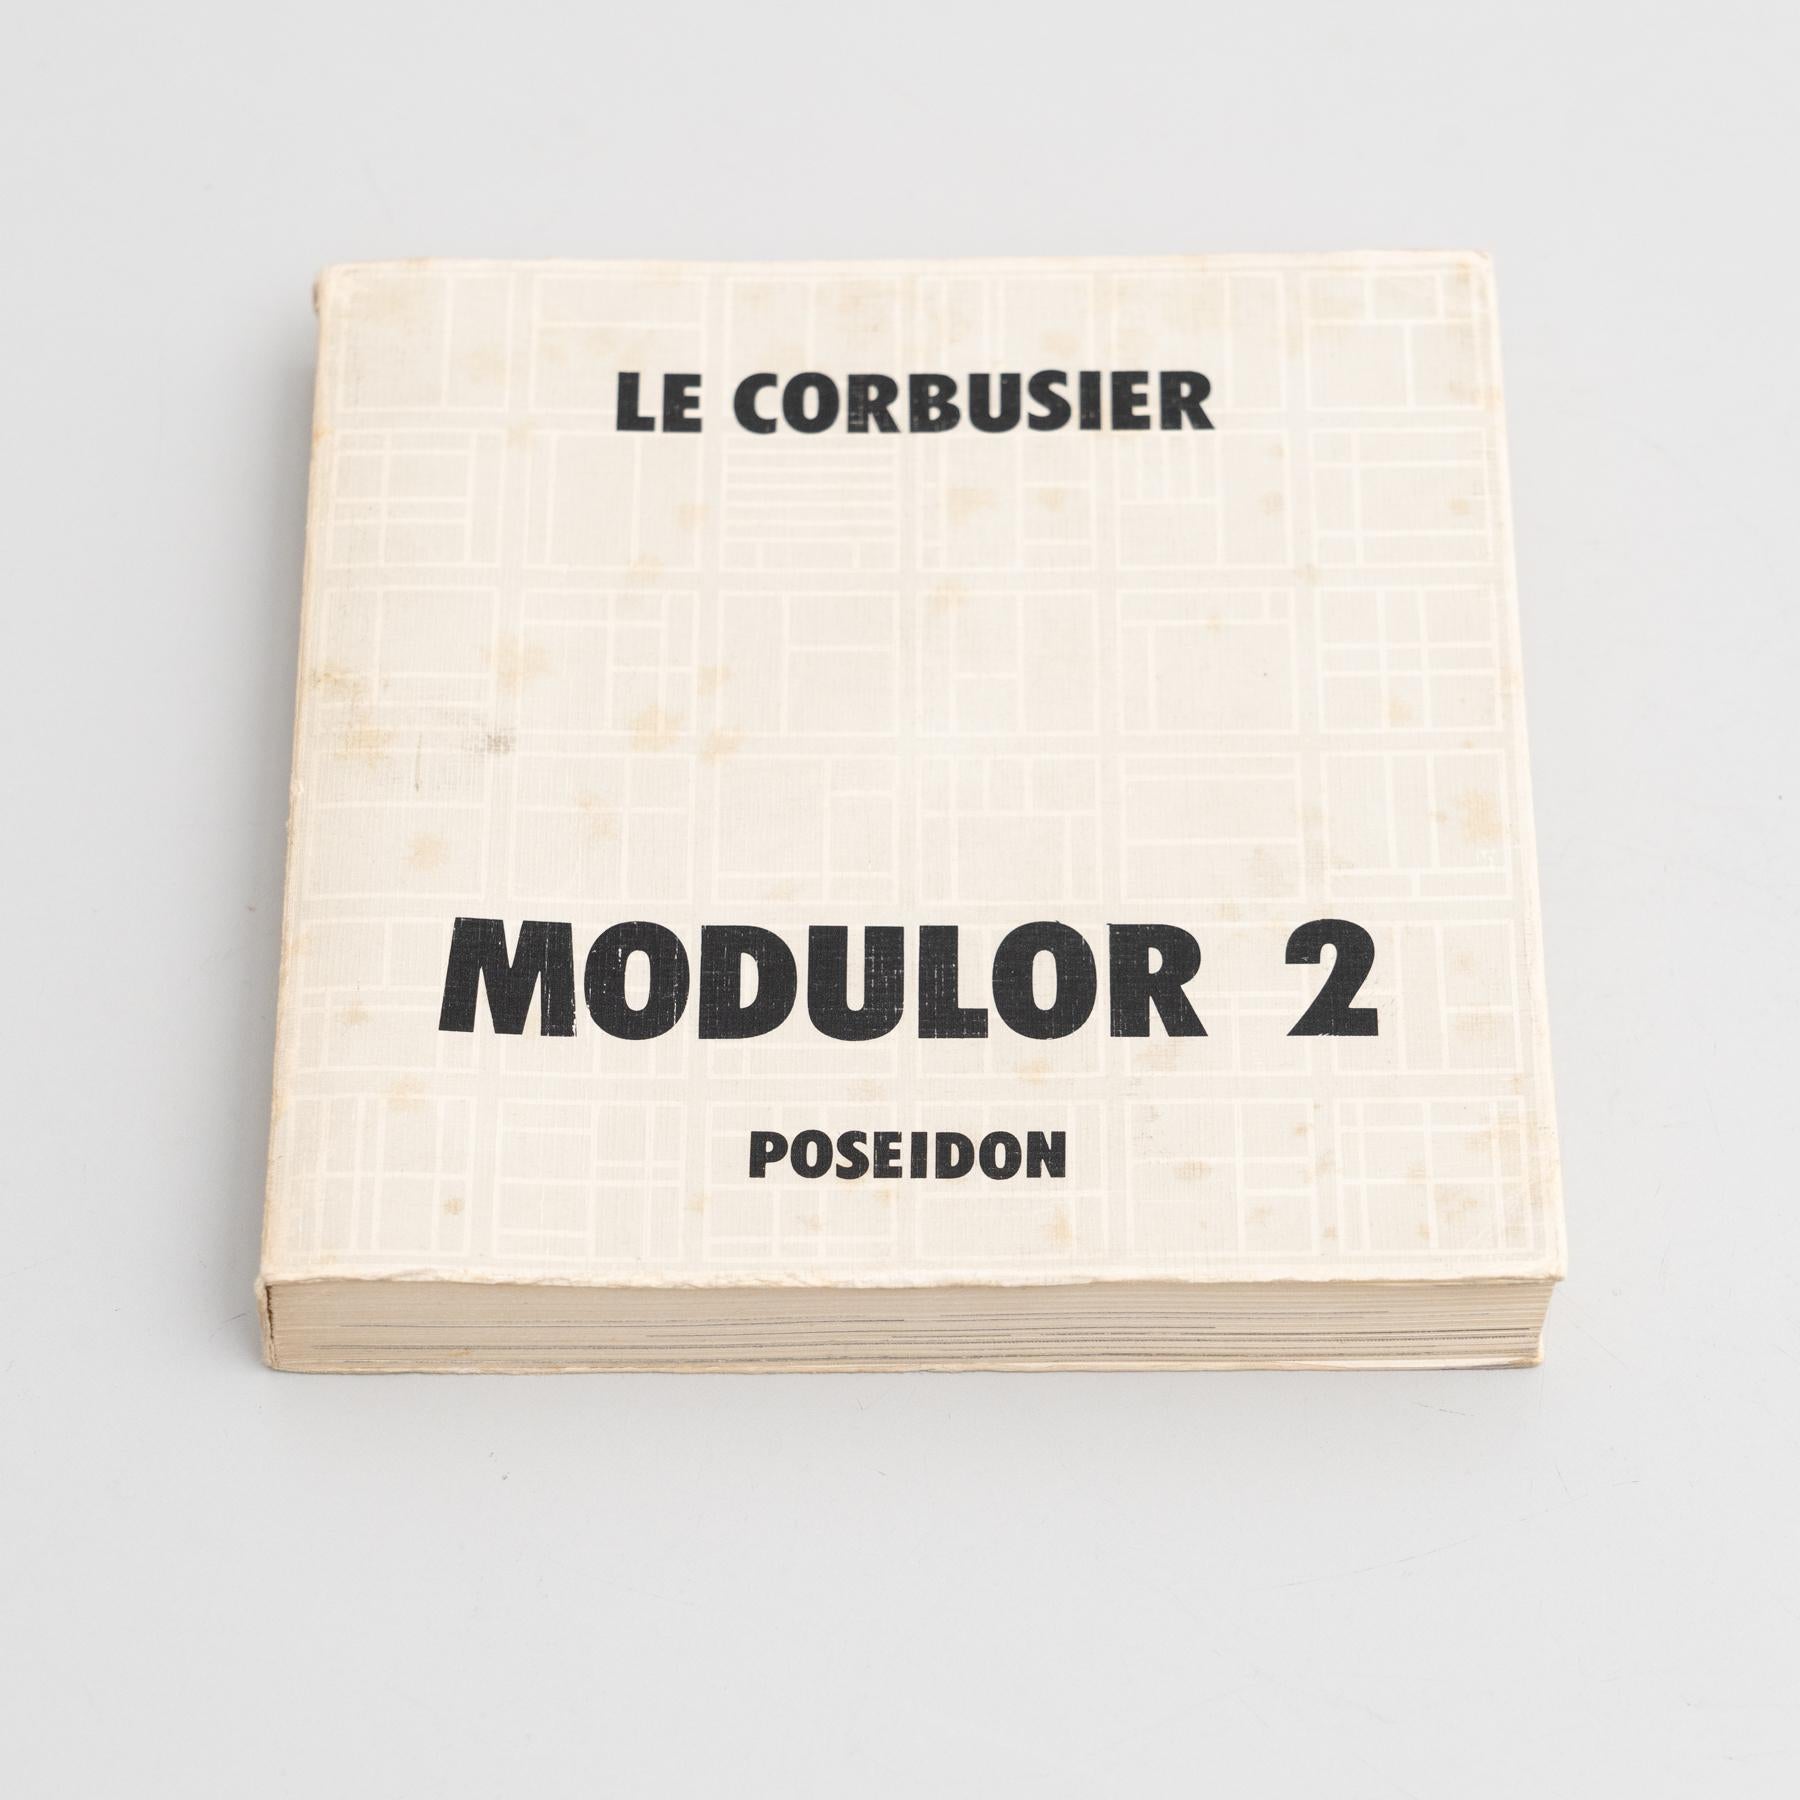 Le Corbusier Der Modulor book. Le Corbusier published Le Modulor in 1948, followed by Modulor 2 in 1955. These works were first published in English as The Modulor in 1954 and Modulor 2 (Let the User Speak Next) in 1958. The Modulor is an